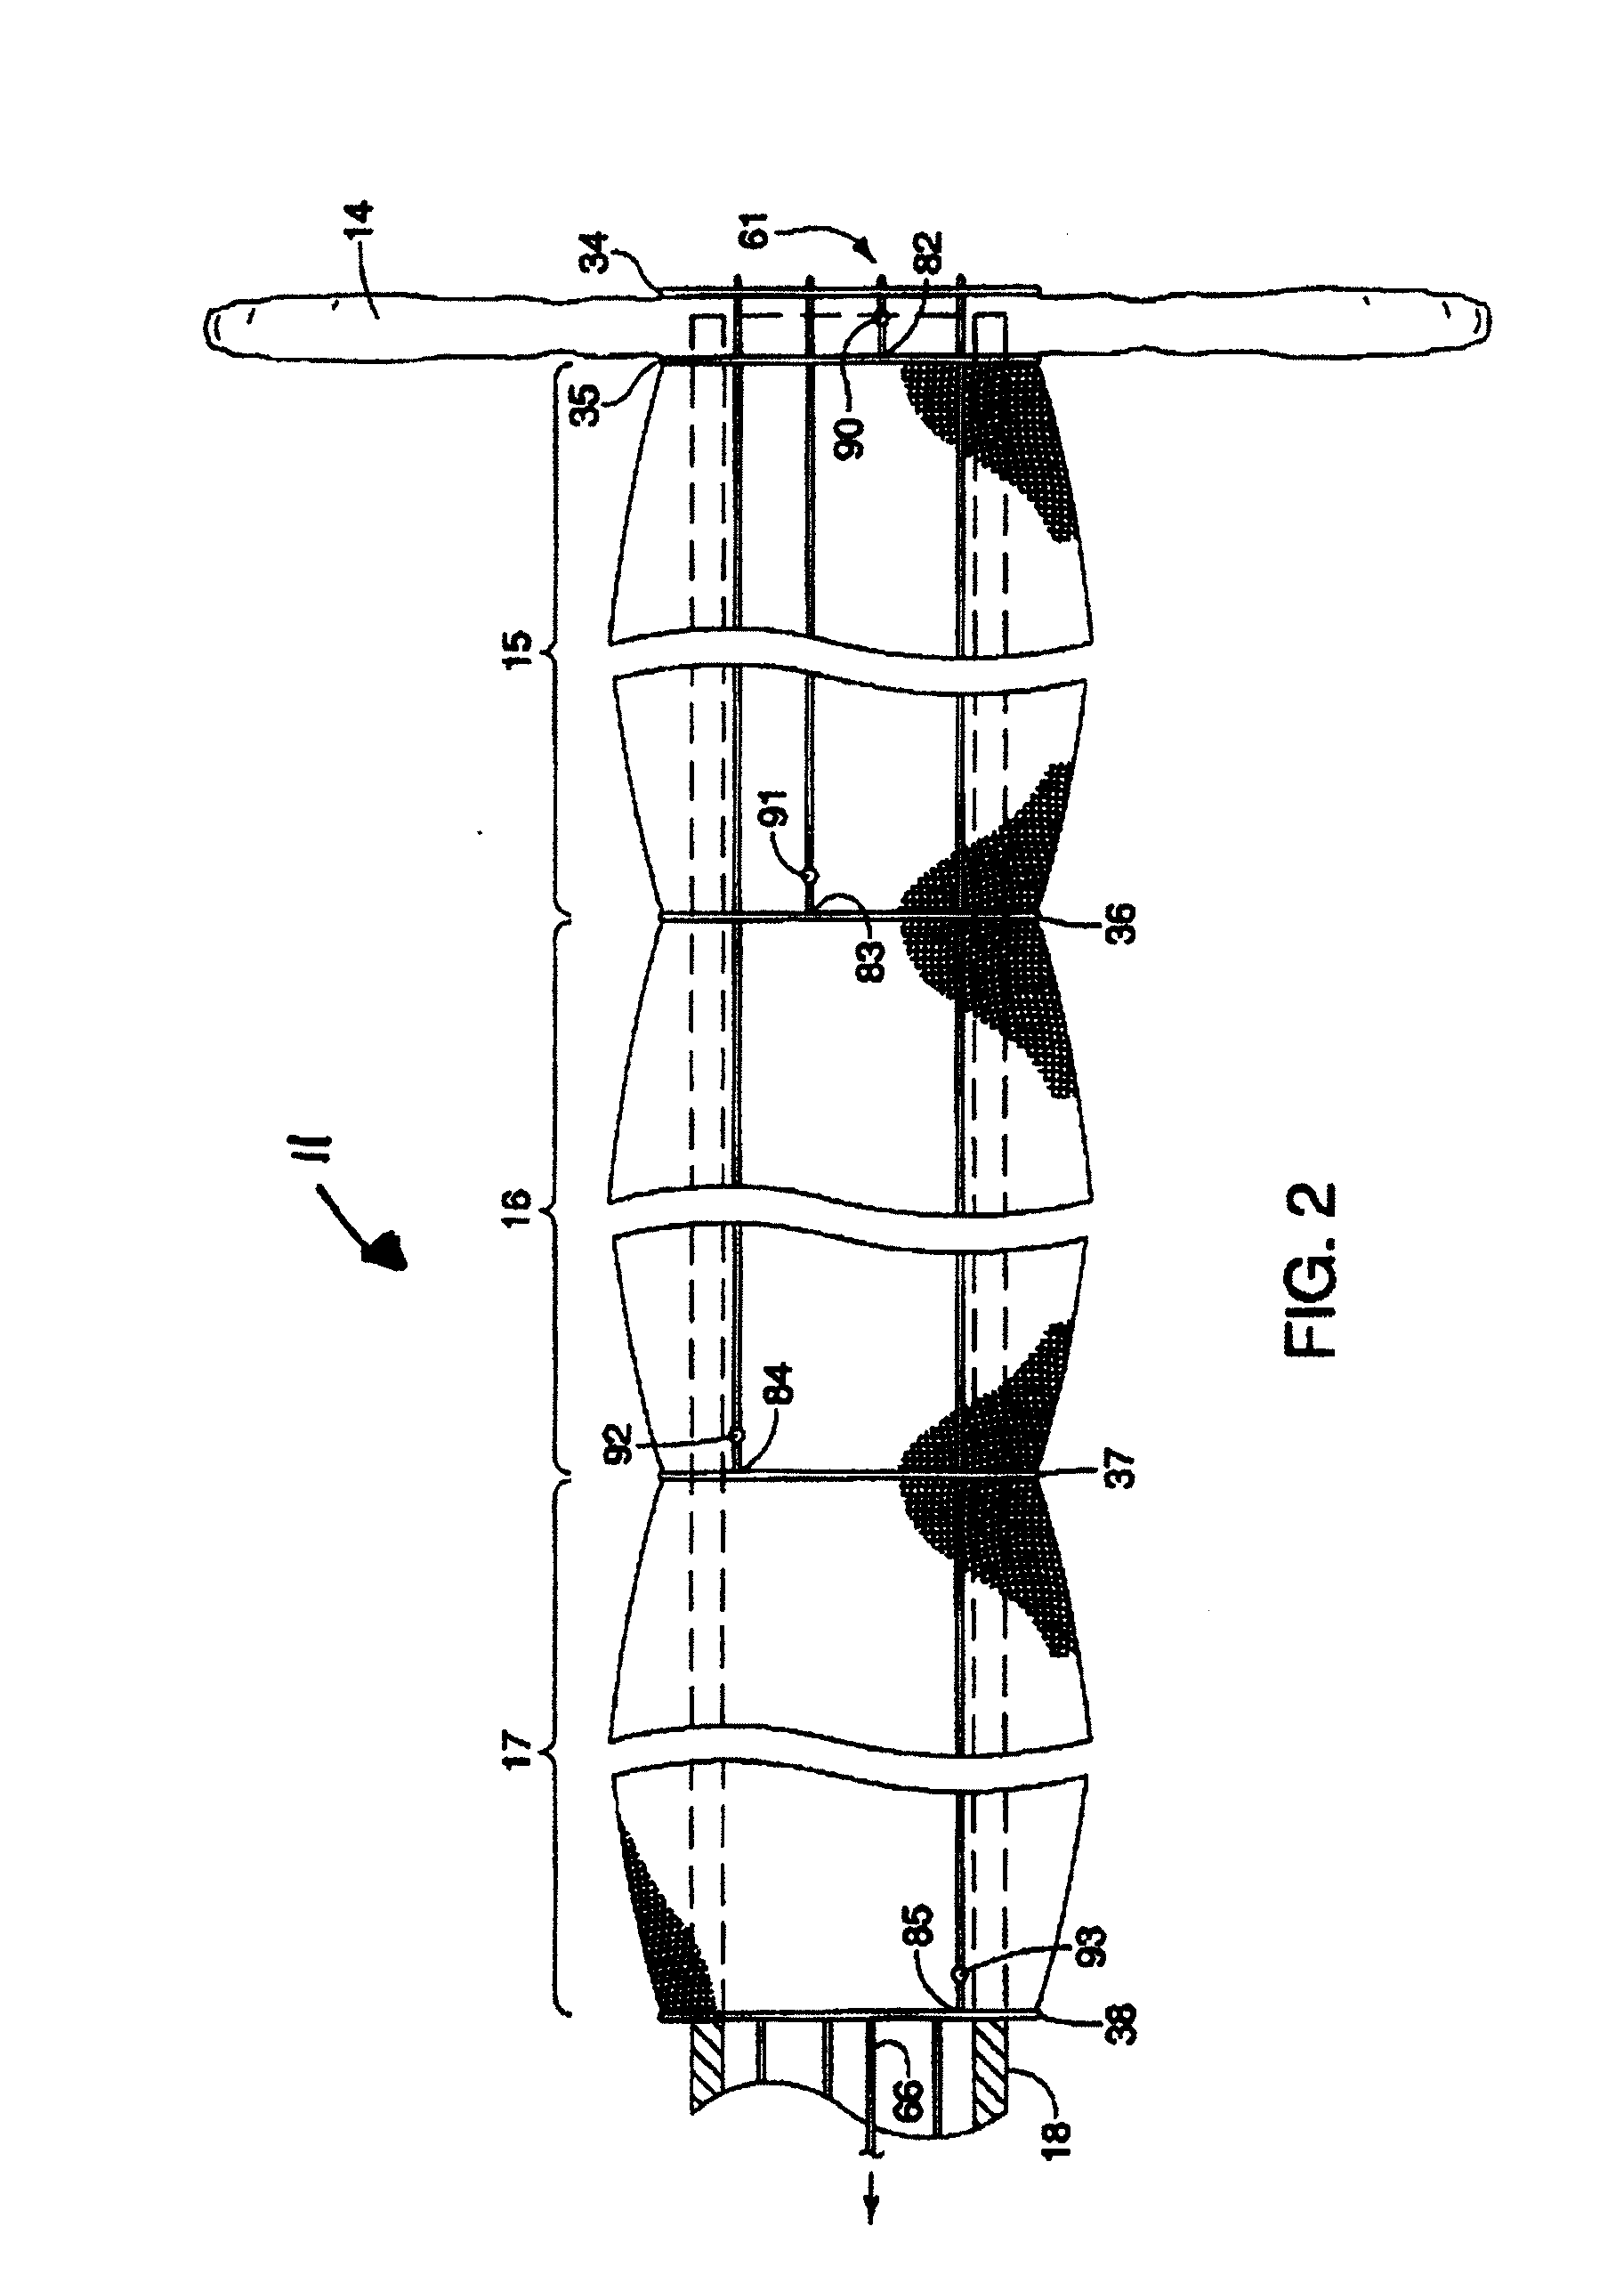 Method of delivering an intragastric device for treating obesity